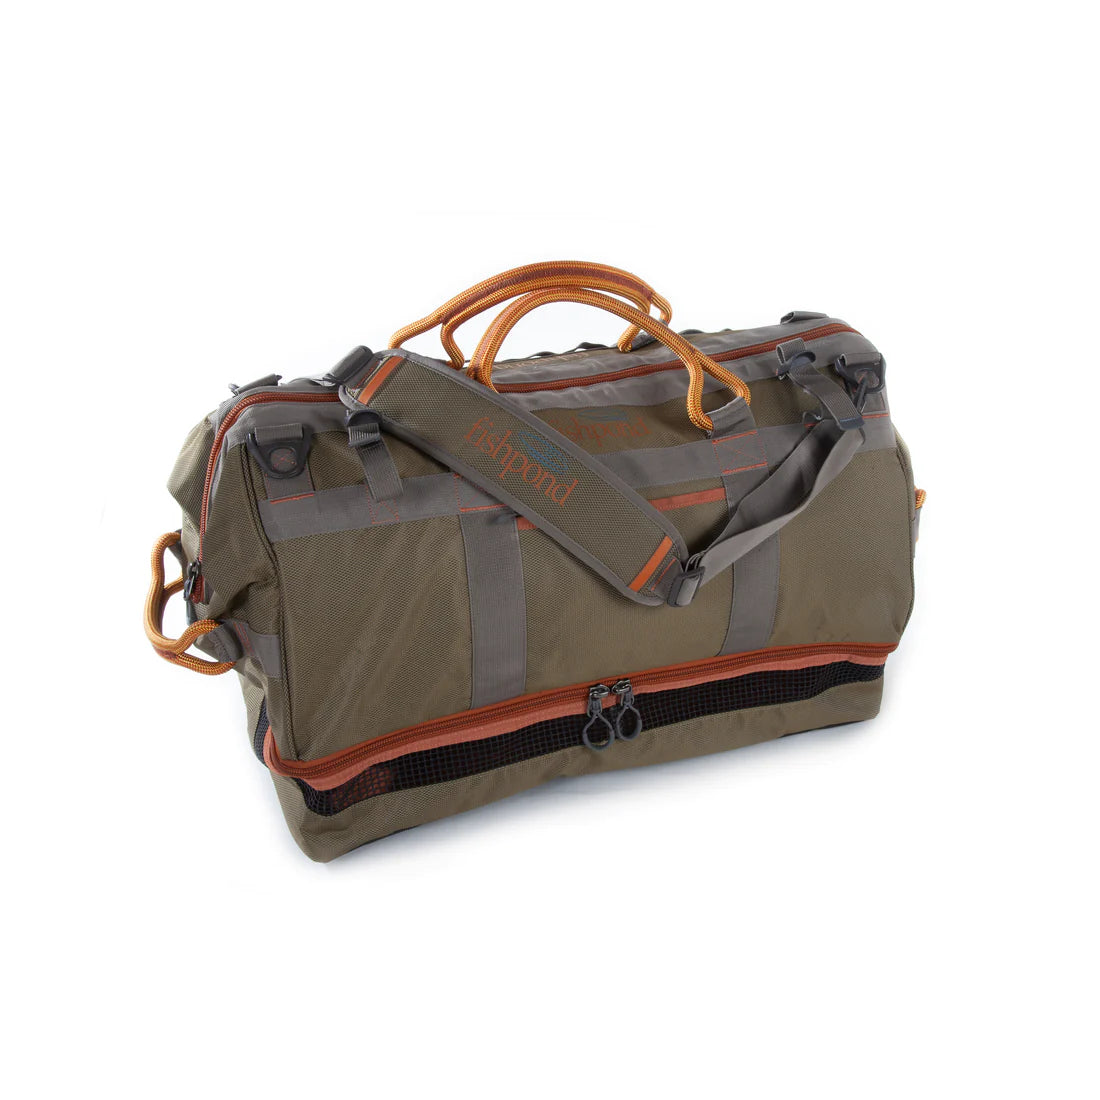 Find great bargains on Fishpond - Cimarron Wader Duffel - Sand Fishpond in  our store now